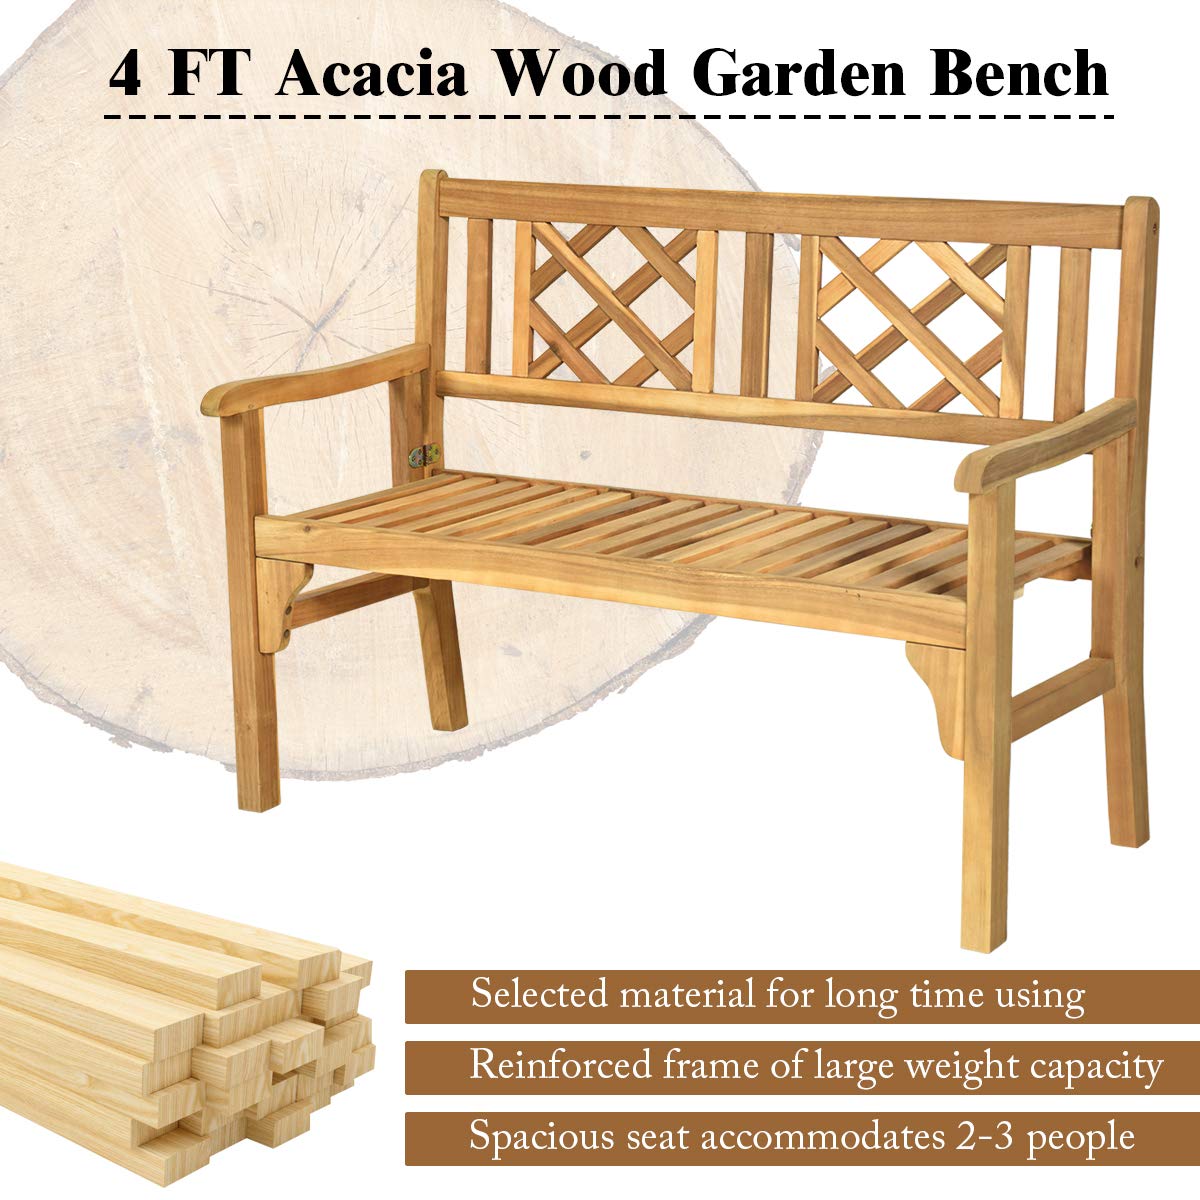 Giantex Outdoor Bench, Patio Wooden Bench, 4 Ft Foldable Acacia Wood Garden Bench, Outside Loveseat with Curved Backrest and Armrest, 705Lbs Weight